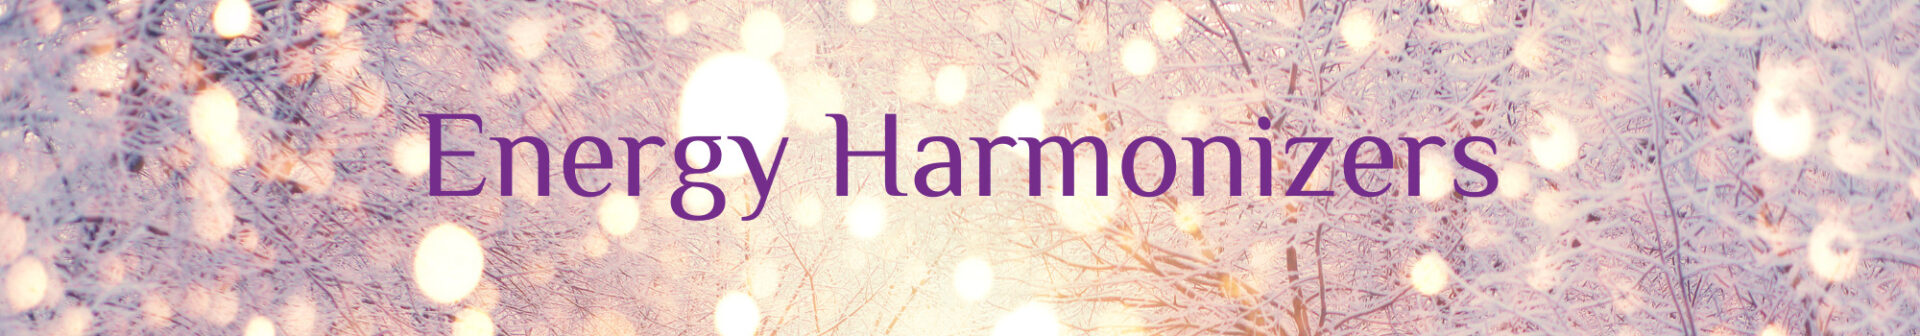 Well-being in winter: Energy Harmonizers